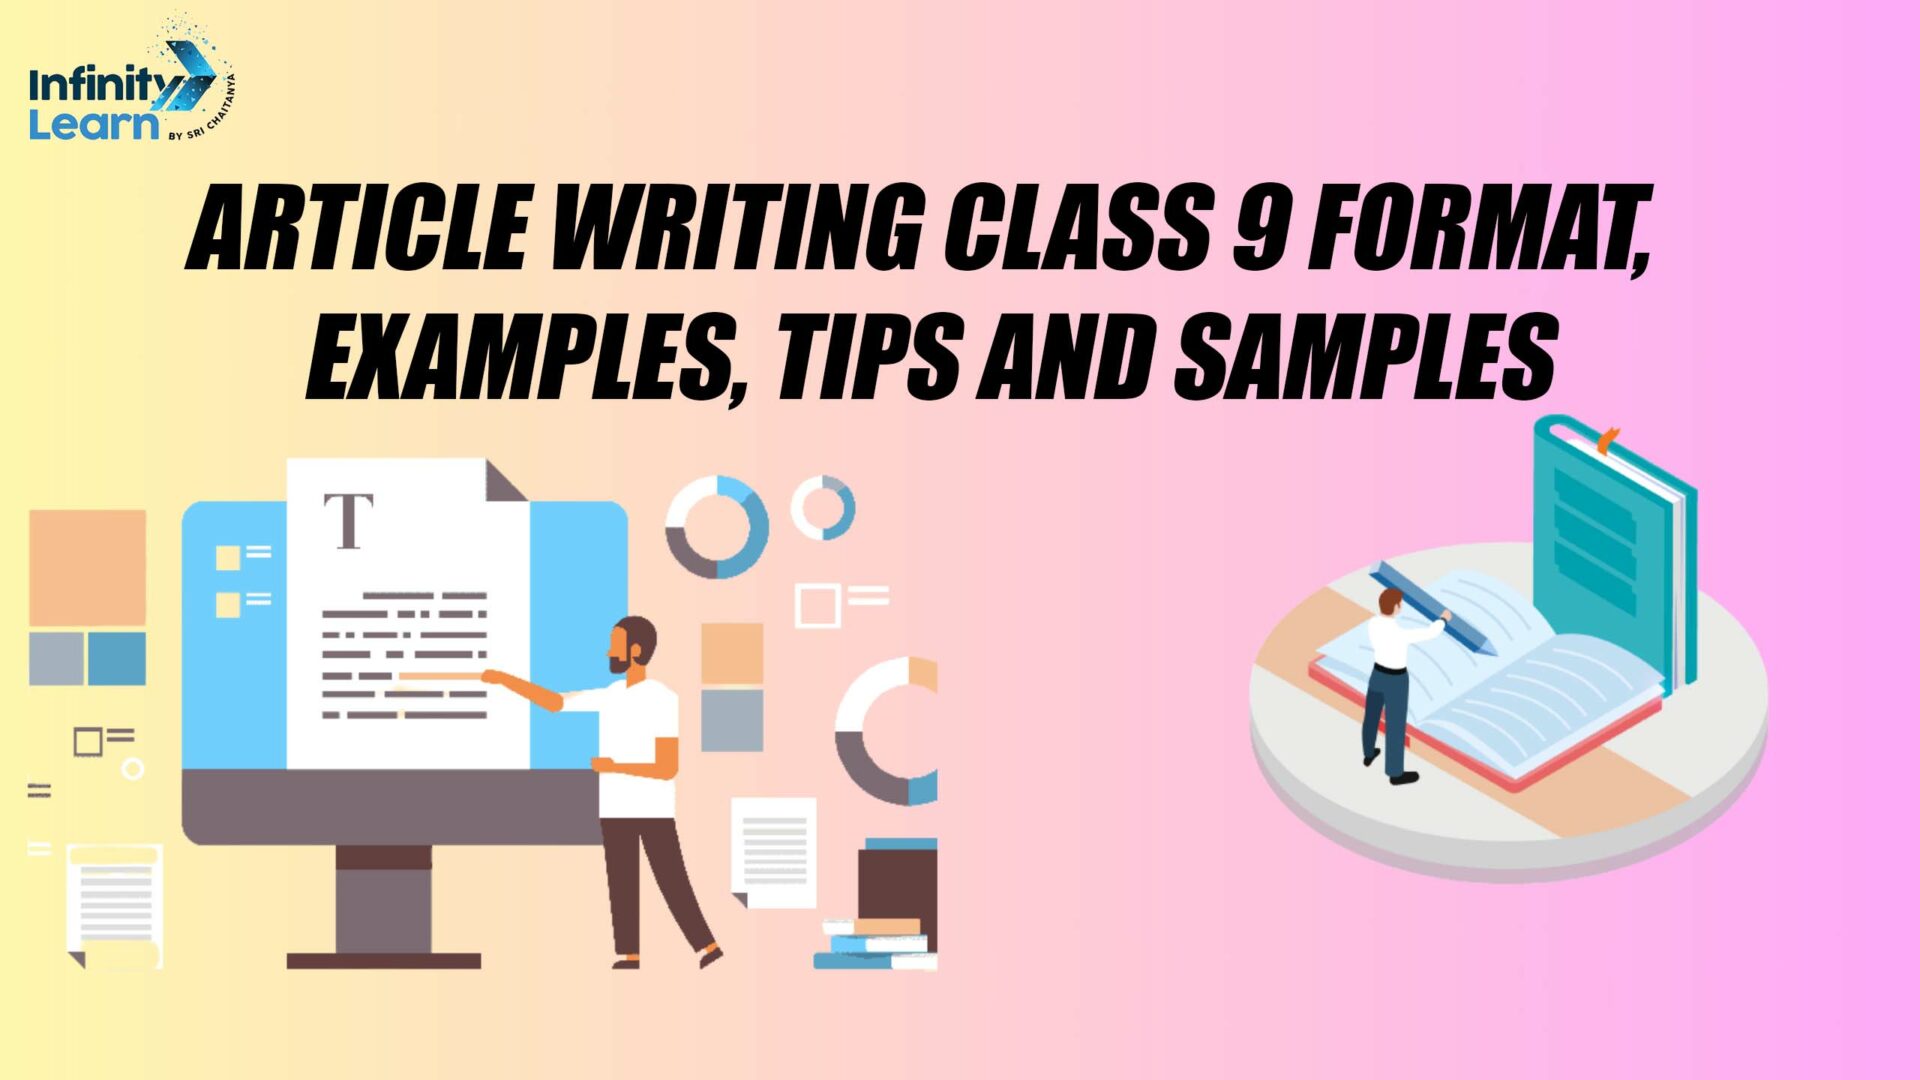 Article Writing for Class 9 